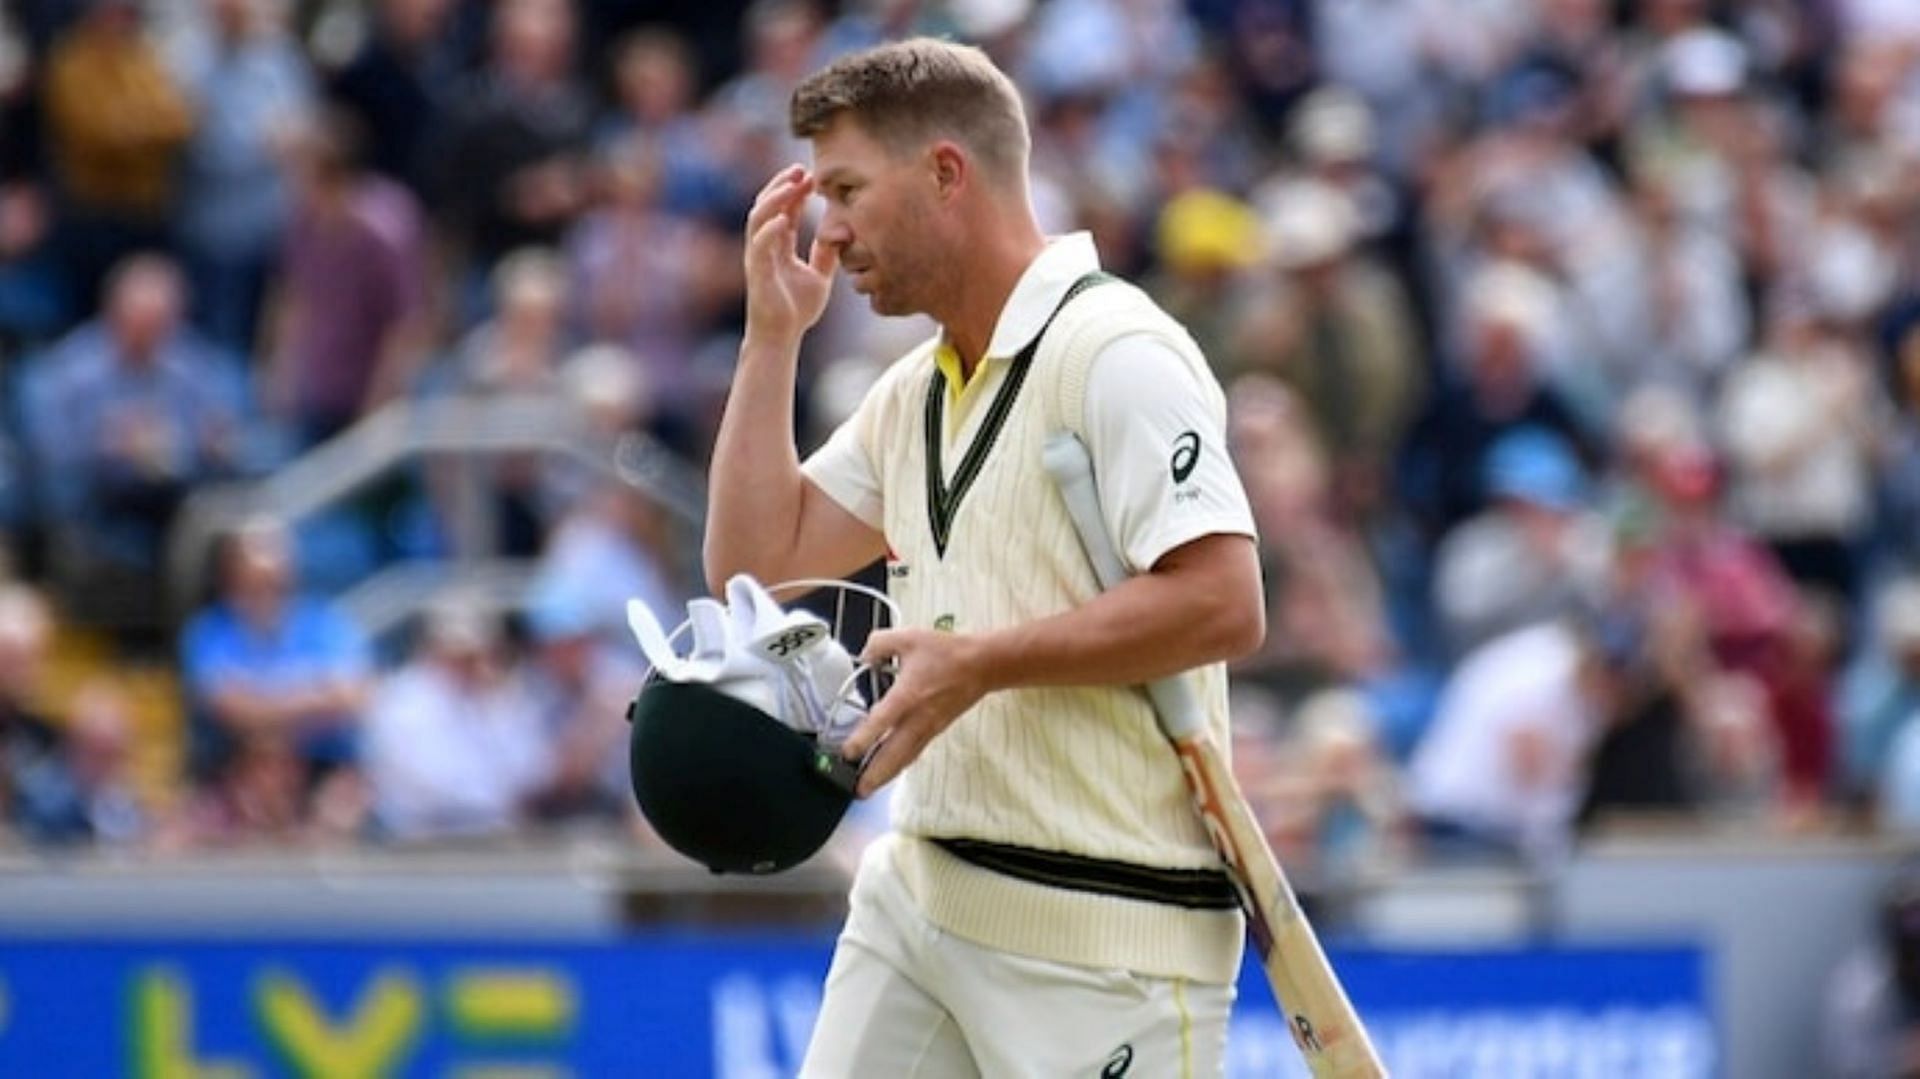 David Warner had a miserable outing in the third Test at Headingley